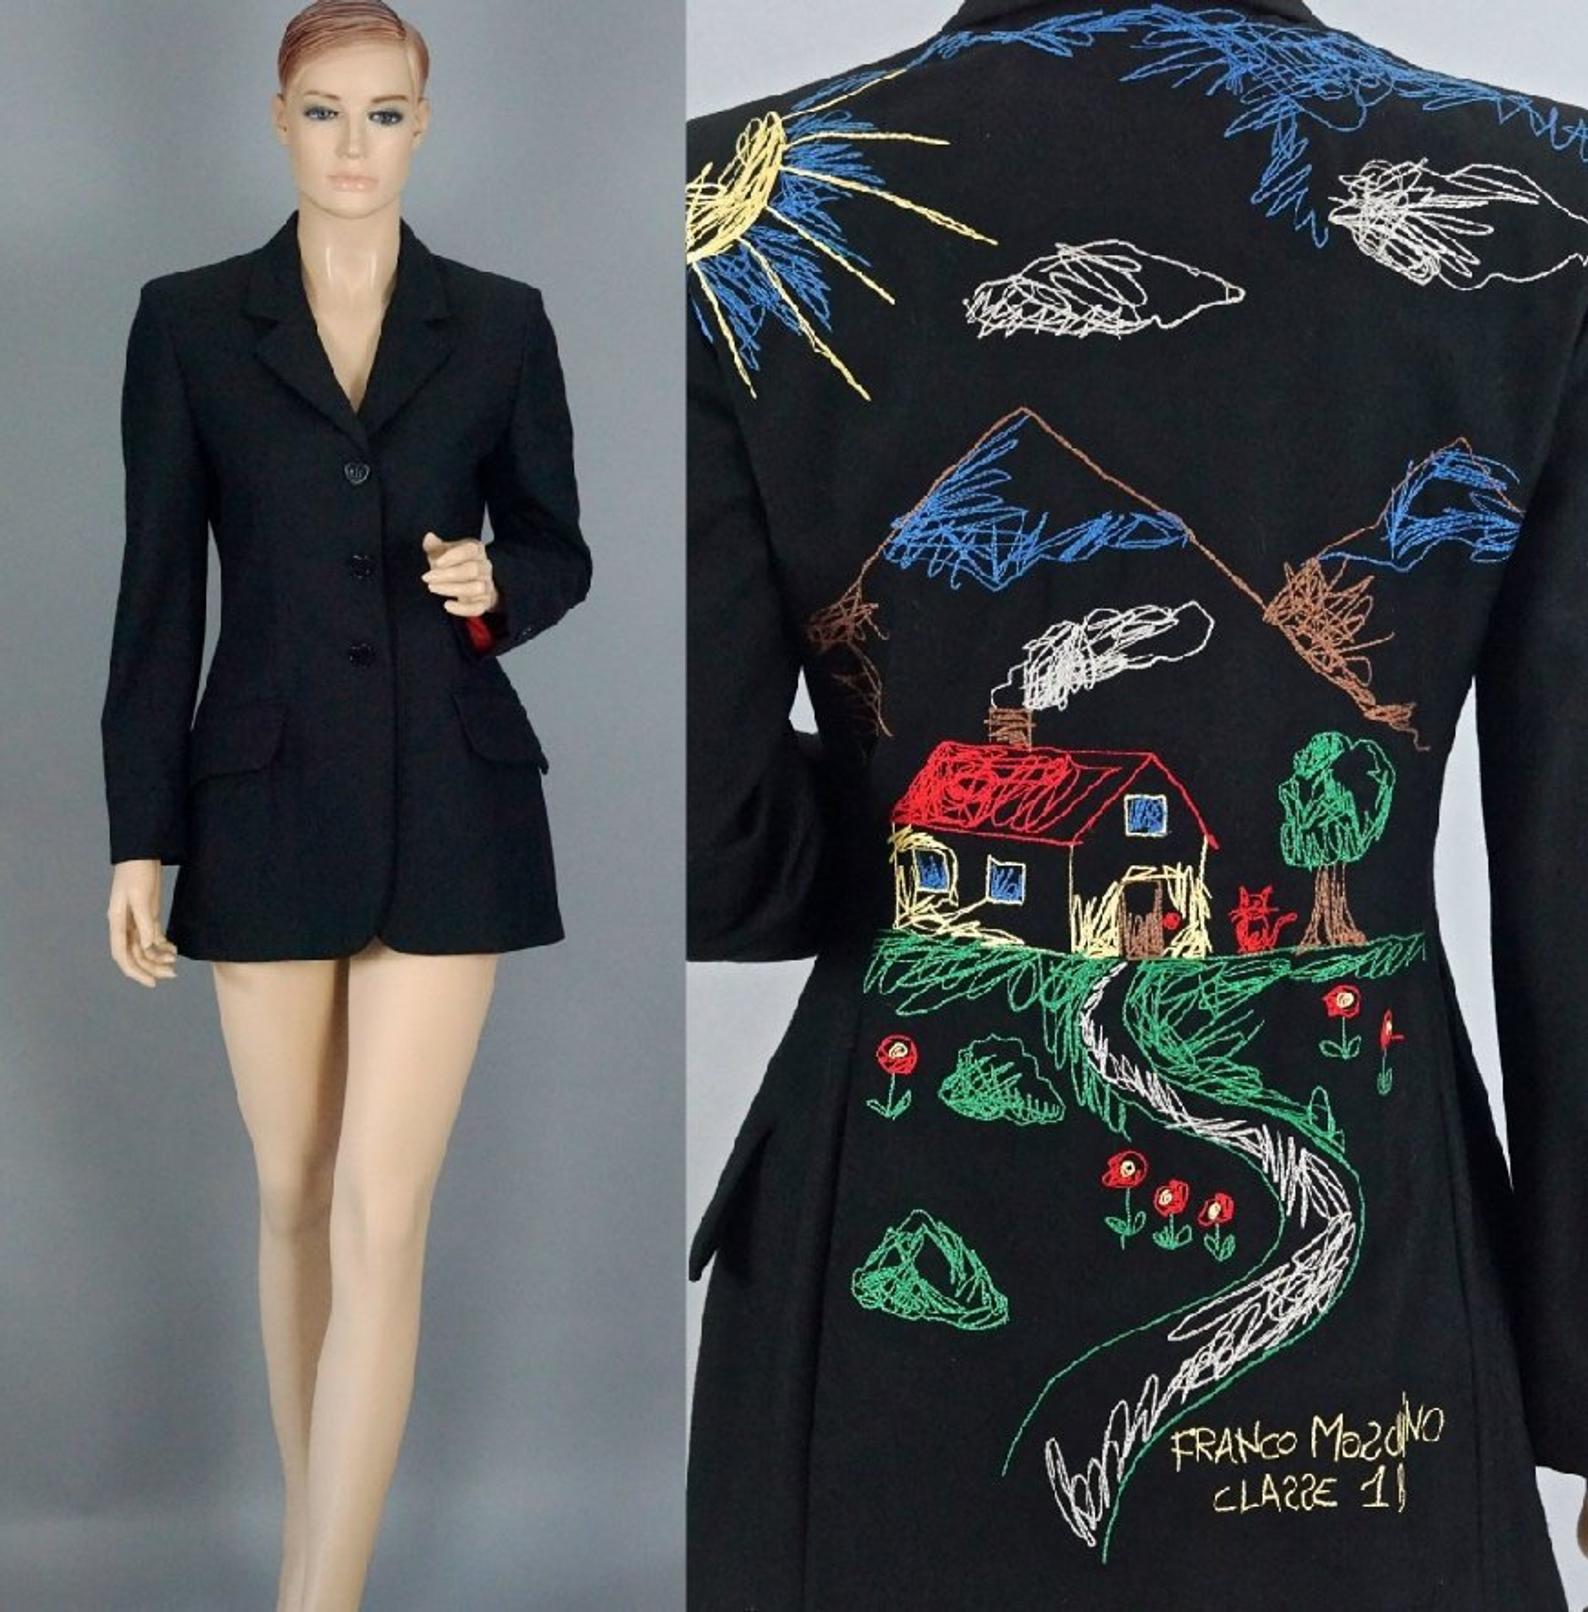 Vintage Rare MOSCHINO CHEAP and CHIC Village Scenery Embroidered Novelty Blazer Jacket

Measurements taken laid flat, please double bust and waist:
Shoulder: 15.35 inches (40 cm)
Sleeves: 24.21 inches (59 cm)
Bust: 17.51 inches (46 cm)
Waist: 15.35